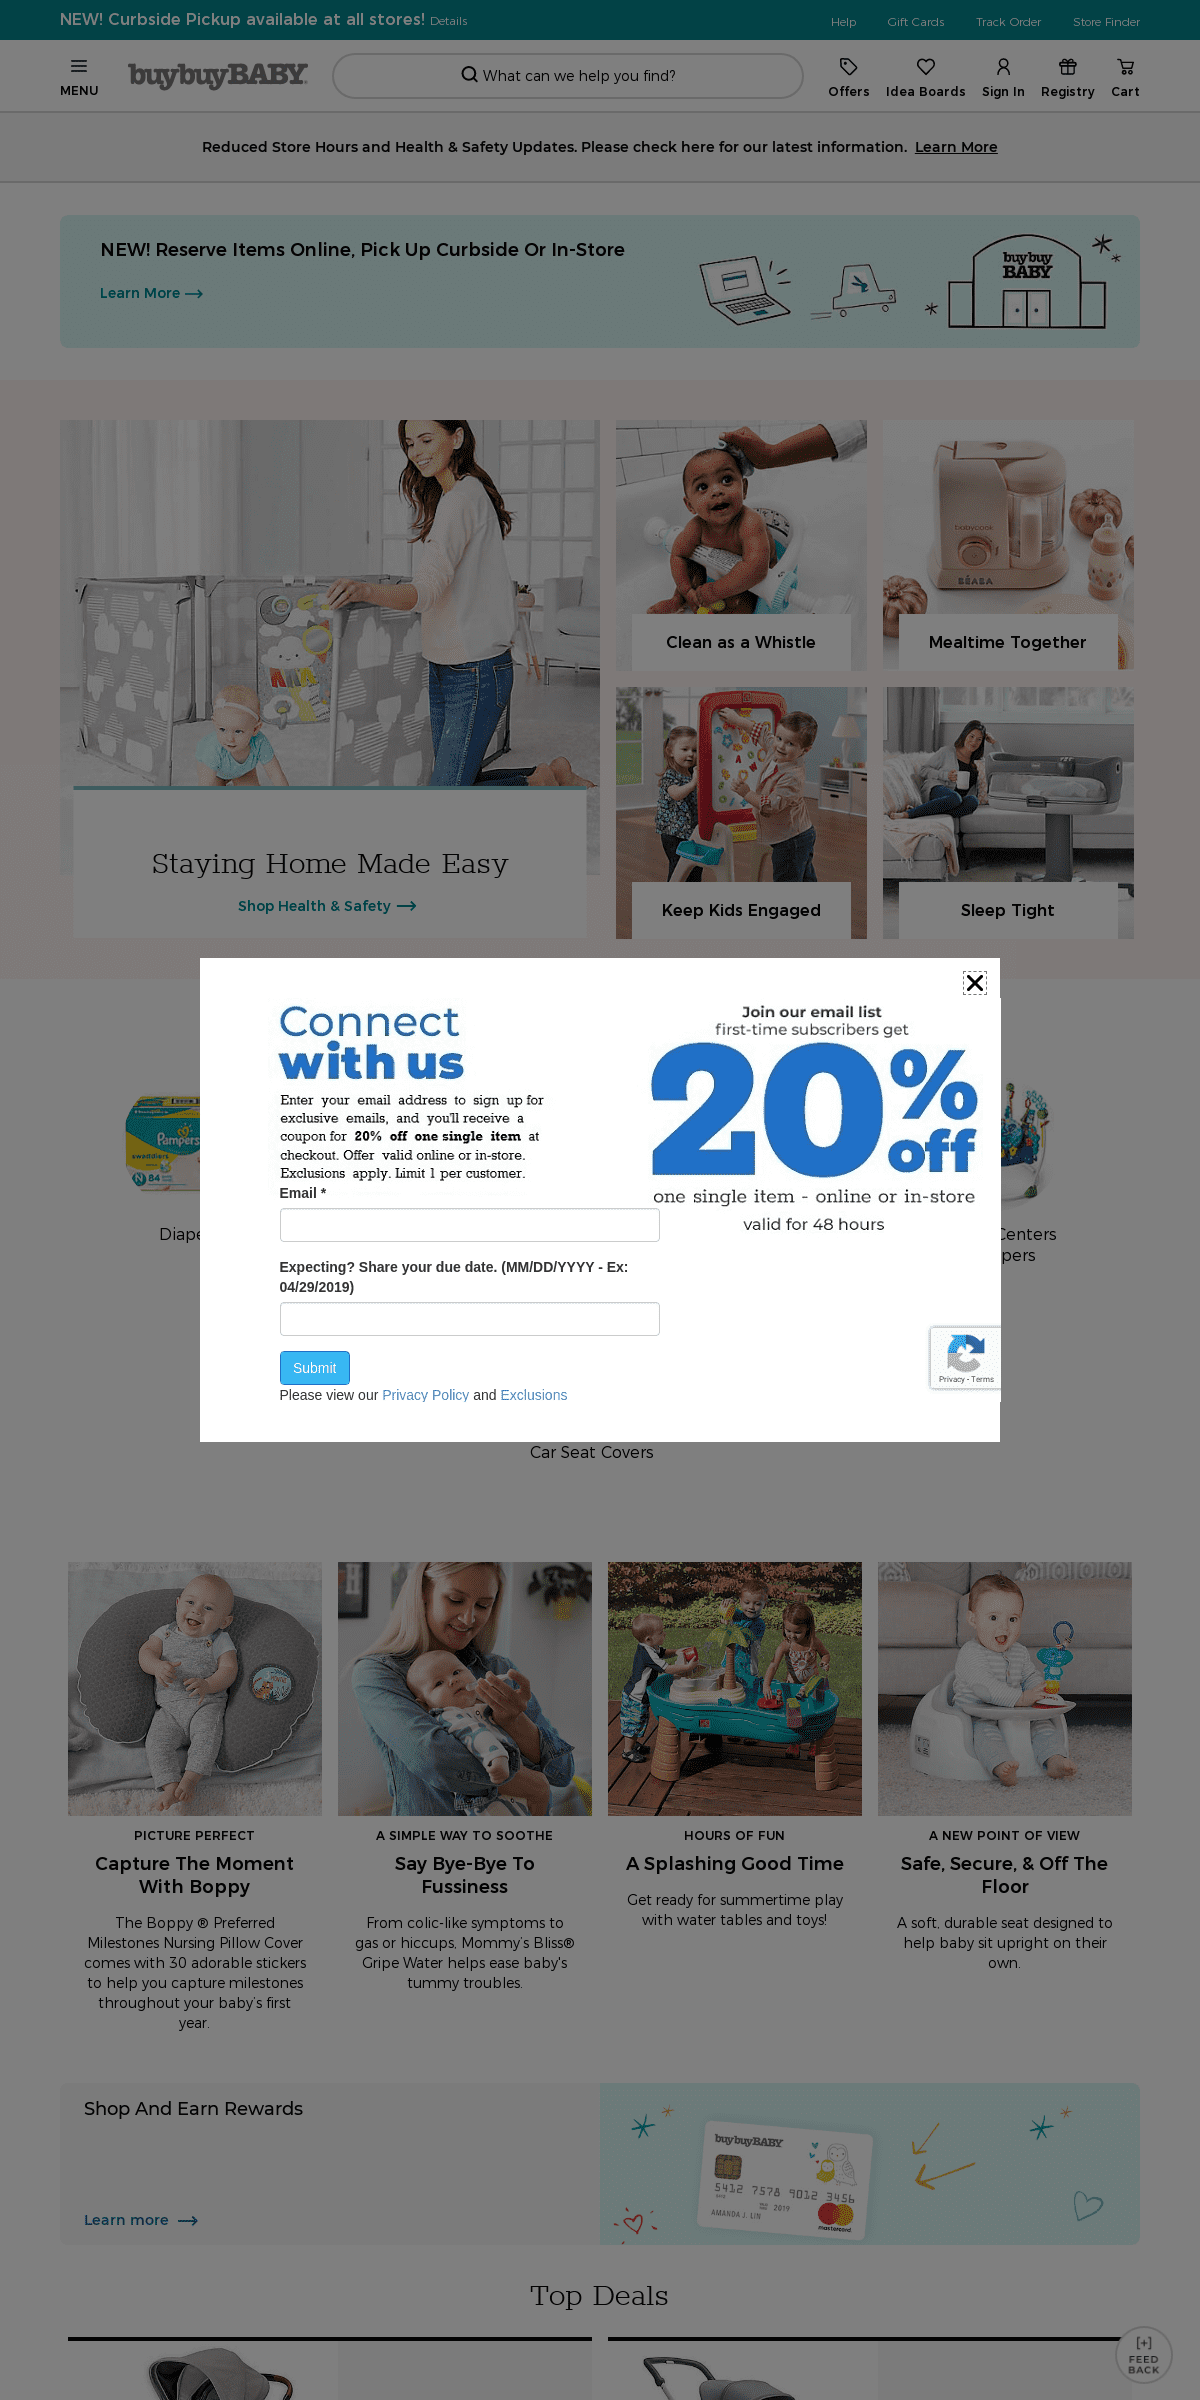 A complete backup of buybuybaby.com